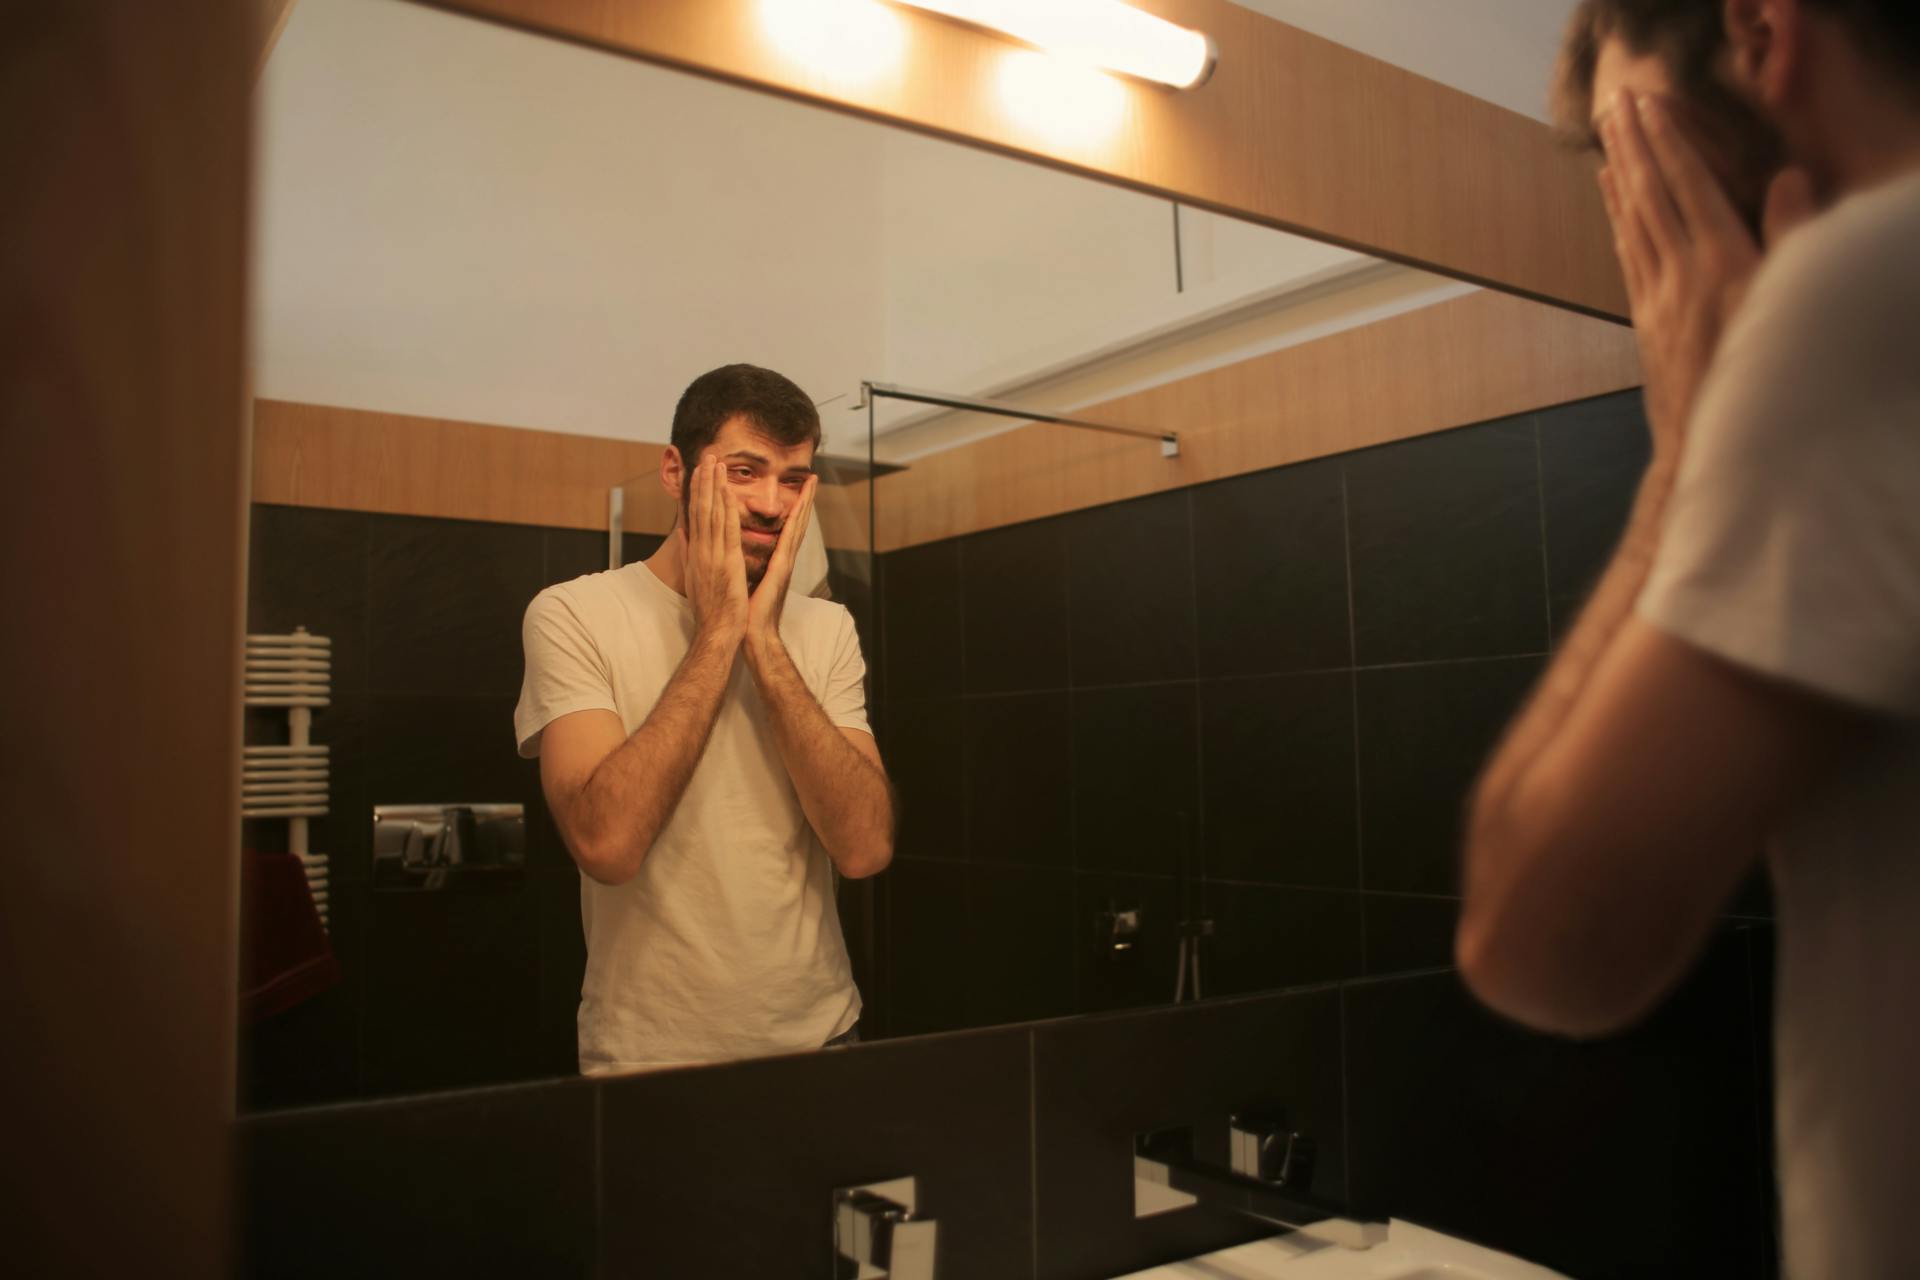 A tired man looking at his reflection in the mirror | Source: Pexels